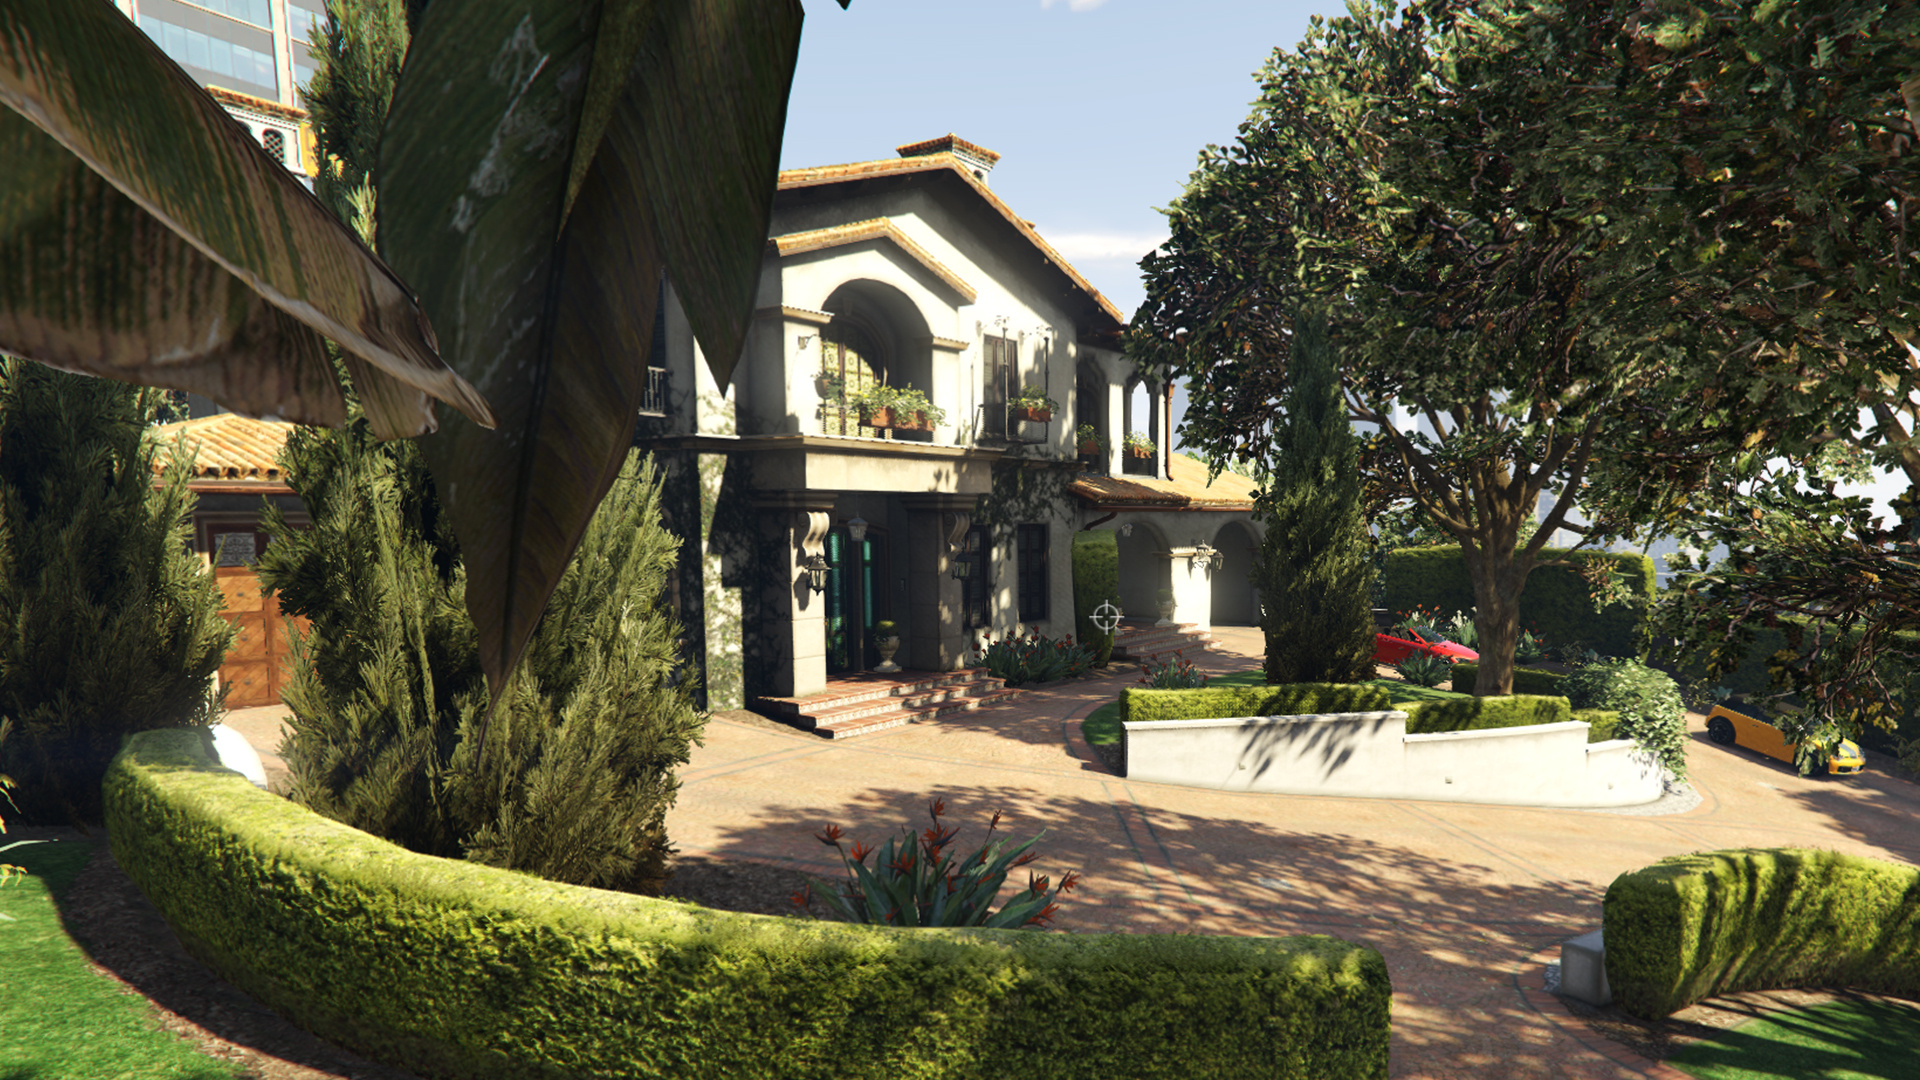 Richest house in gta 5 фото 63